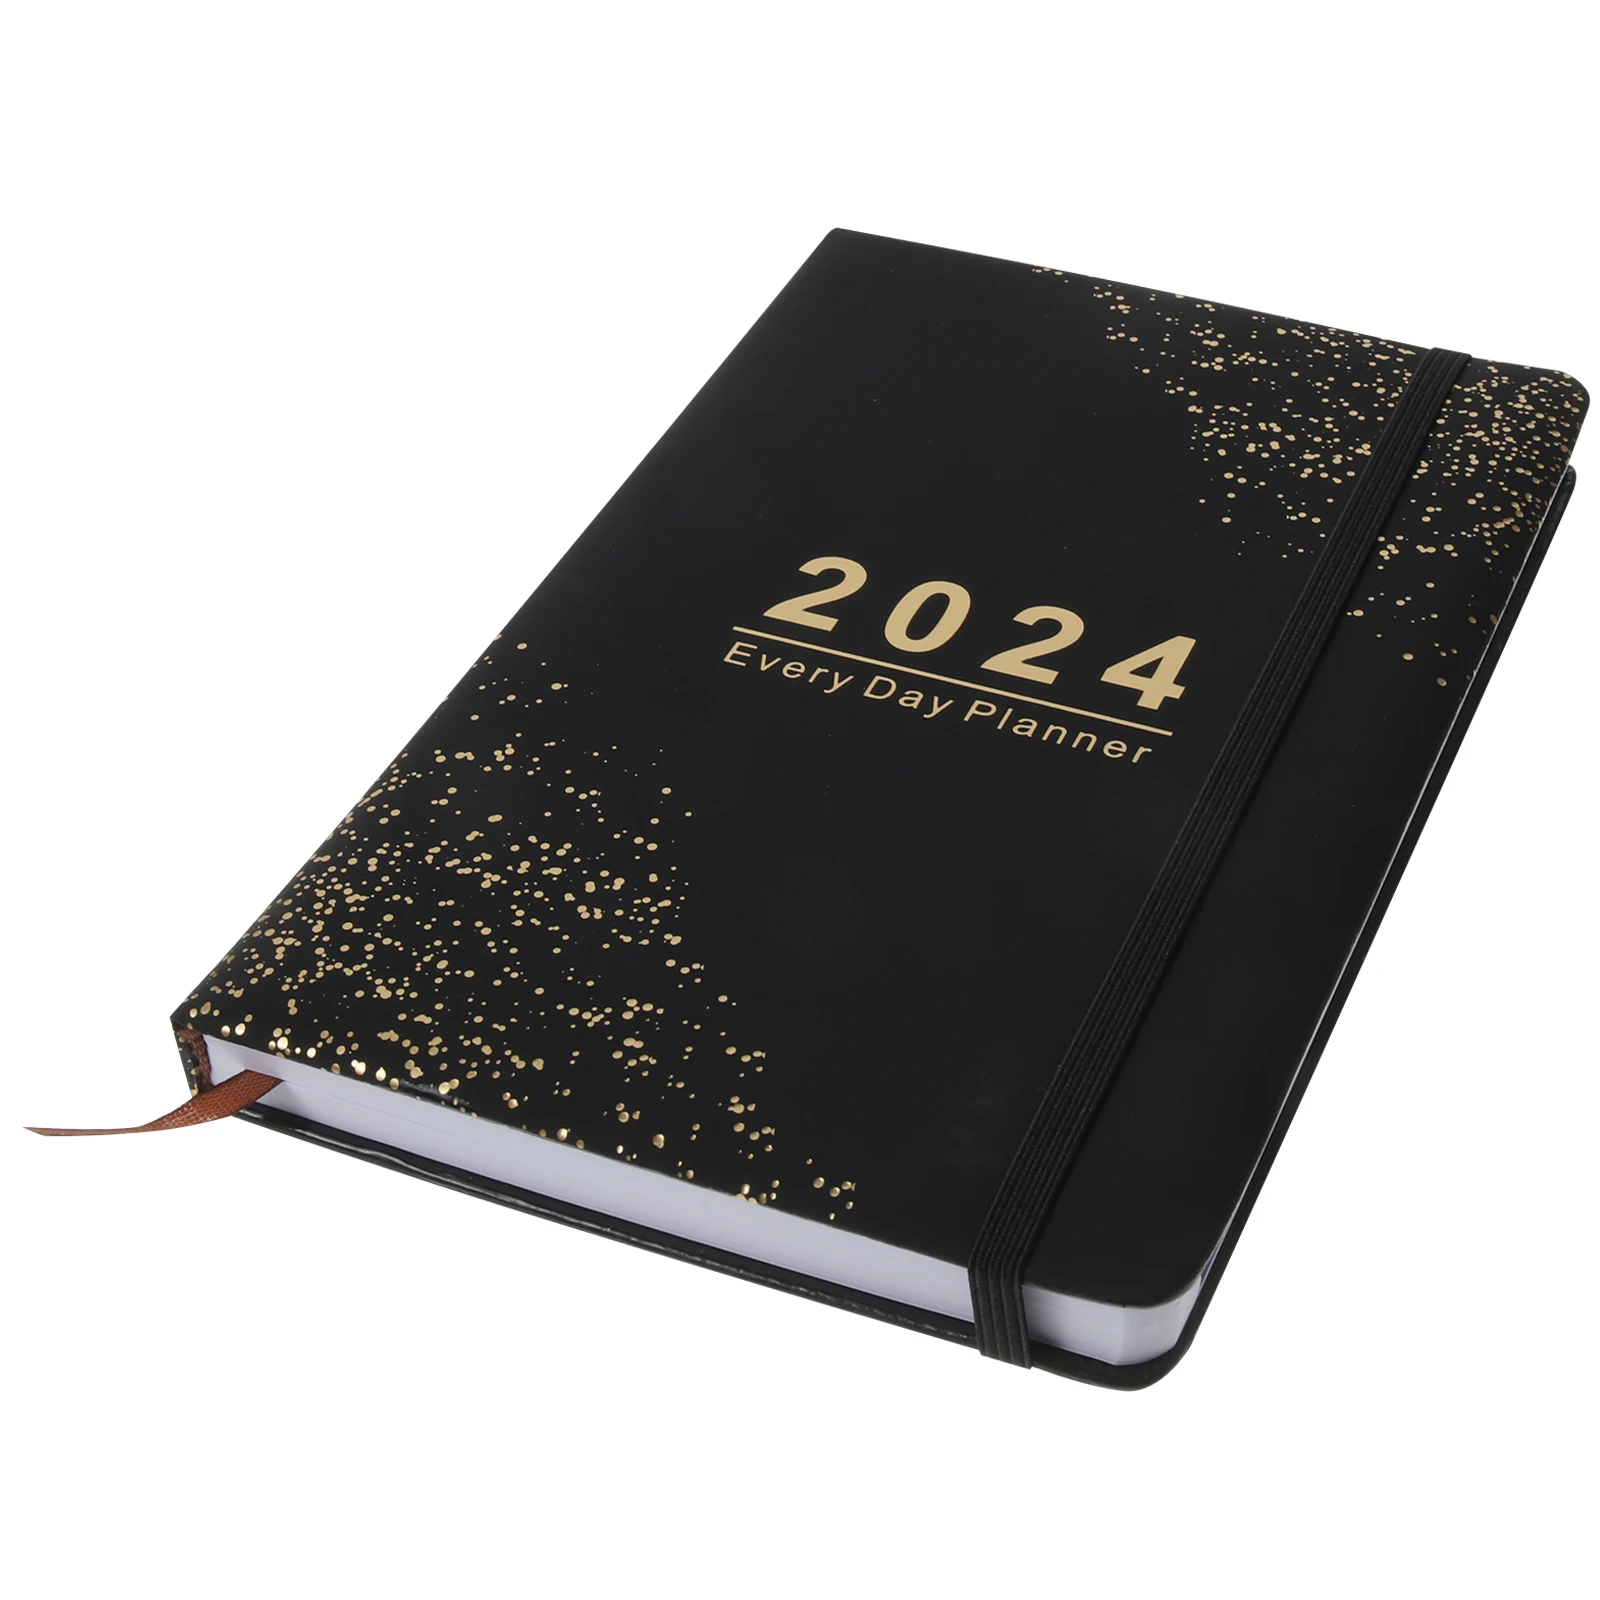 2024 Schedule Daily Schedule English Notebook Schedule Leather Cover Daily Schedule Schedule This Log Table Monthly Planner diary 2021 notebook a5 planner 365 days plan book schedule agenda notepads planner organizer weekly monthly journals gift new